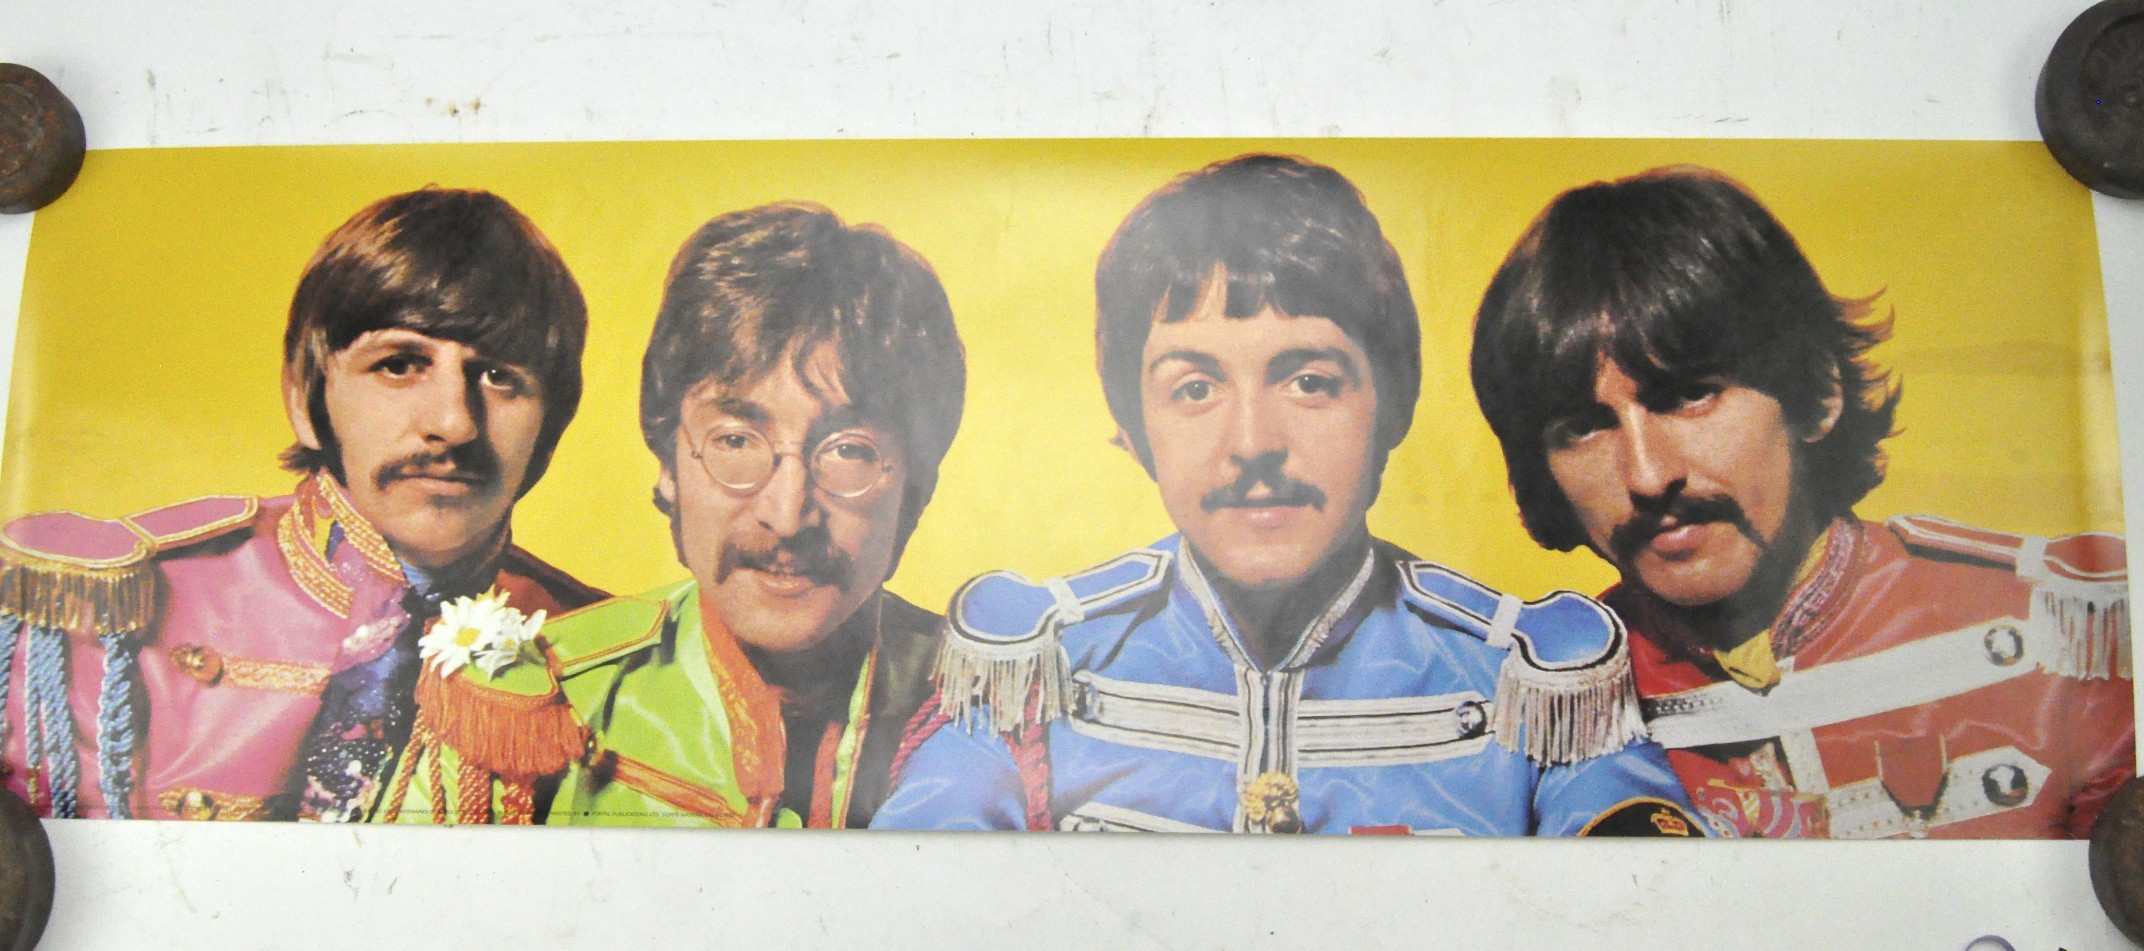 The Beatles original promotional posters, - Image 3 of 5